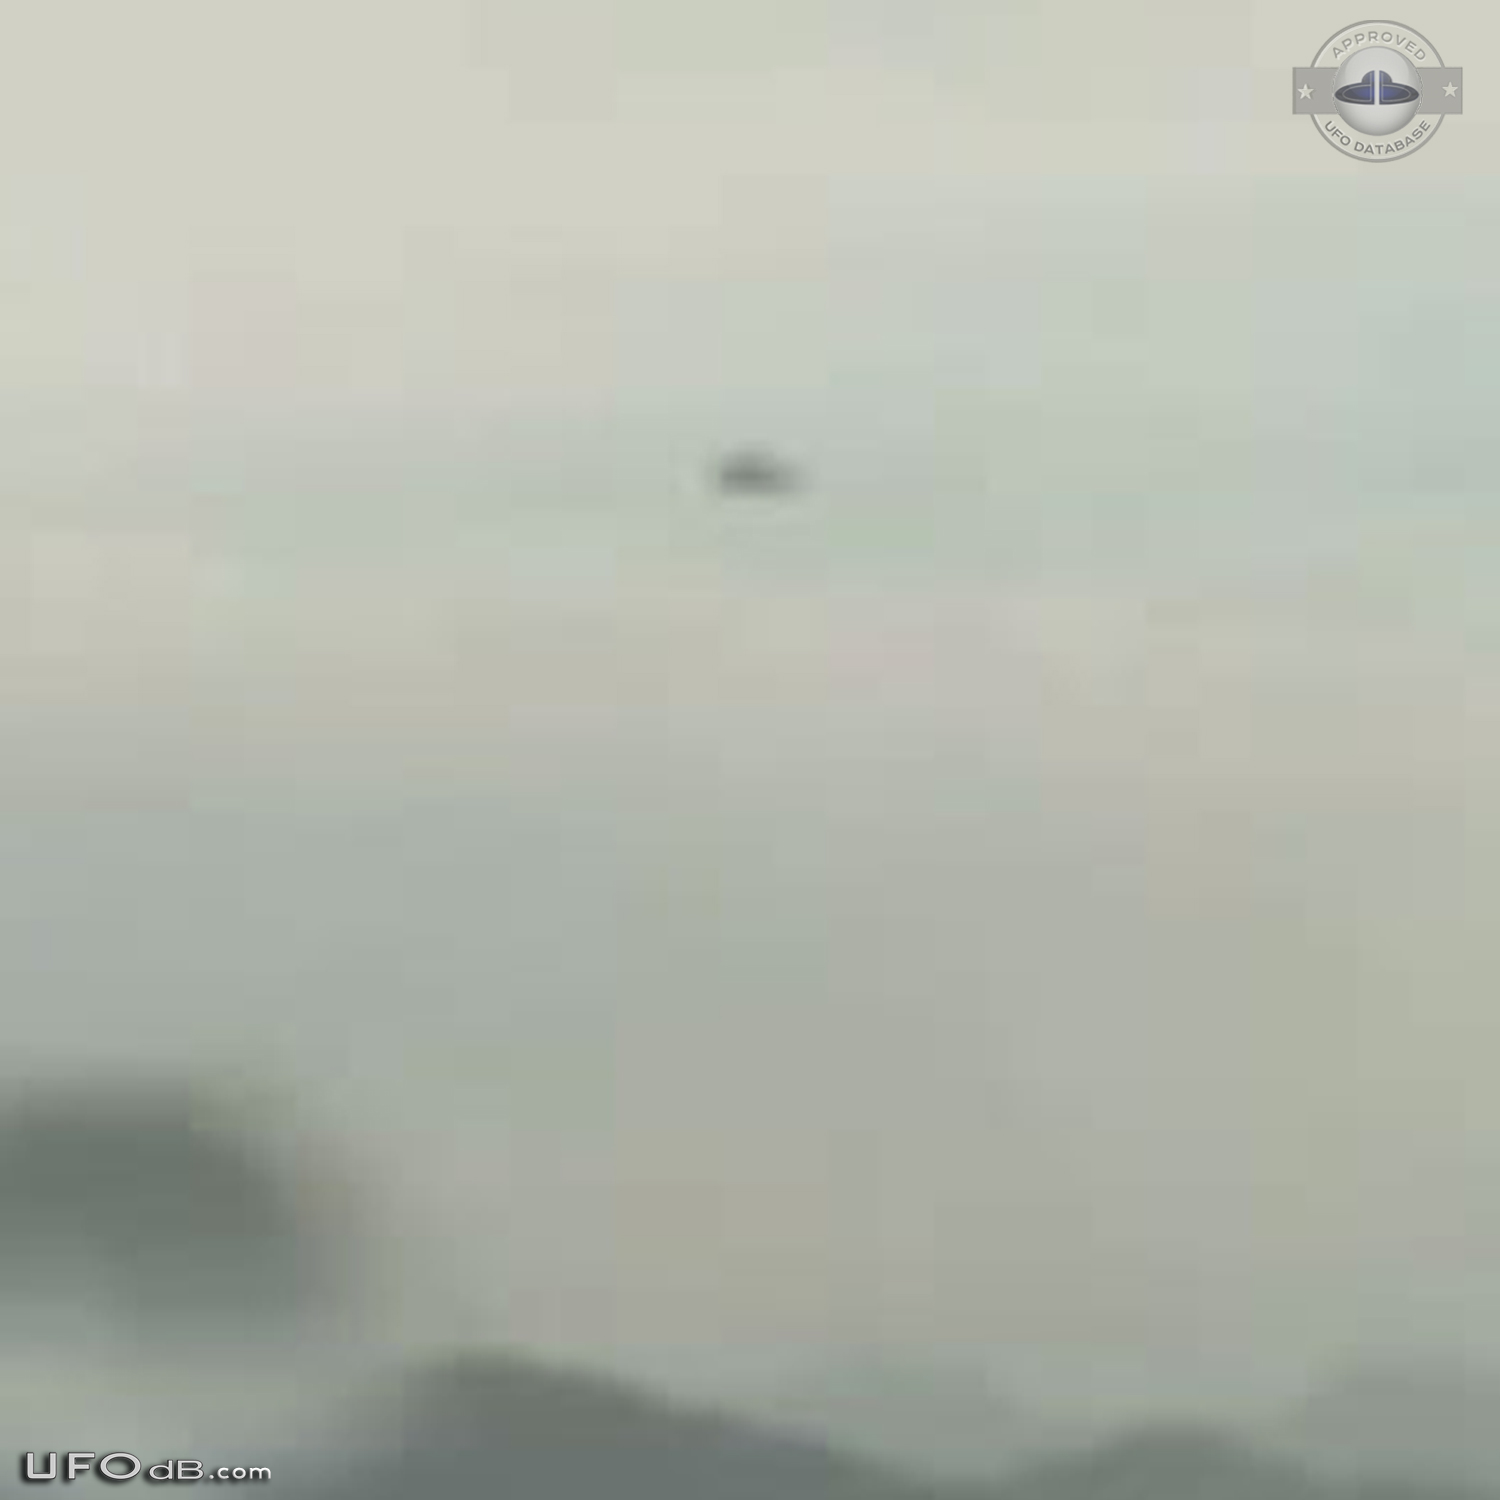 UFO caught on Picture by Hong Kong weather camera - April 2014 UFO Picture #567-6